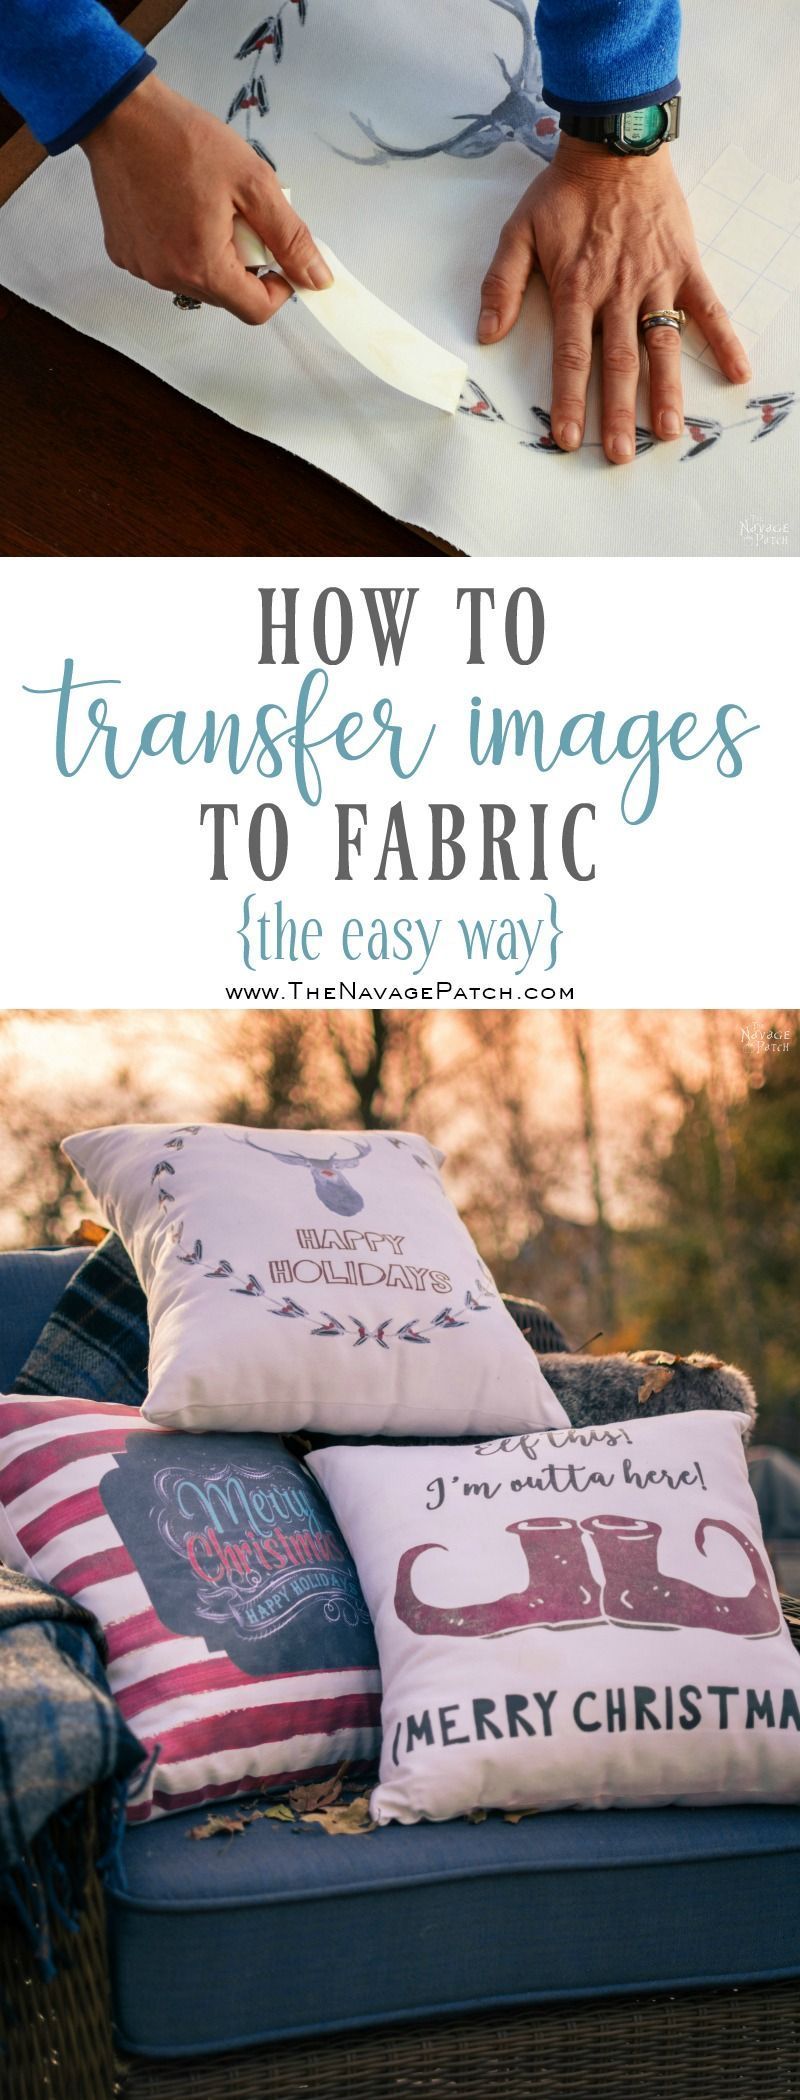 Image Transfer to Fabric - The Quick & Easy Way! - The Navage Patch - Image Transfer to Fabric - The Quick & Easy Way! - The Navage Patch -   14 diy Easy step by step ideas